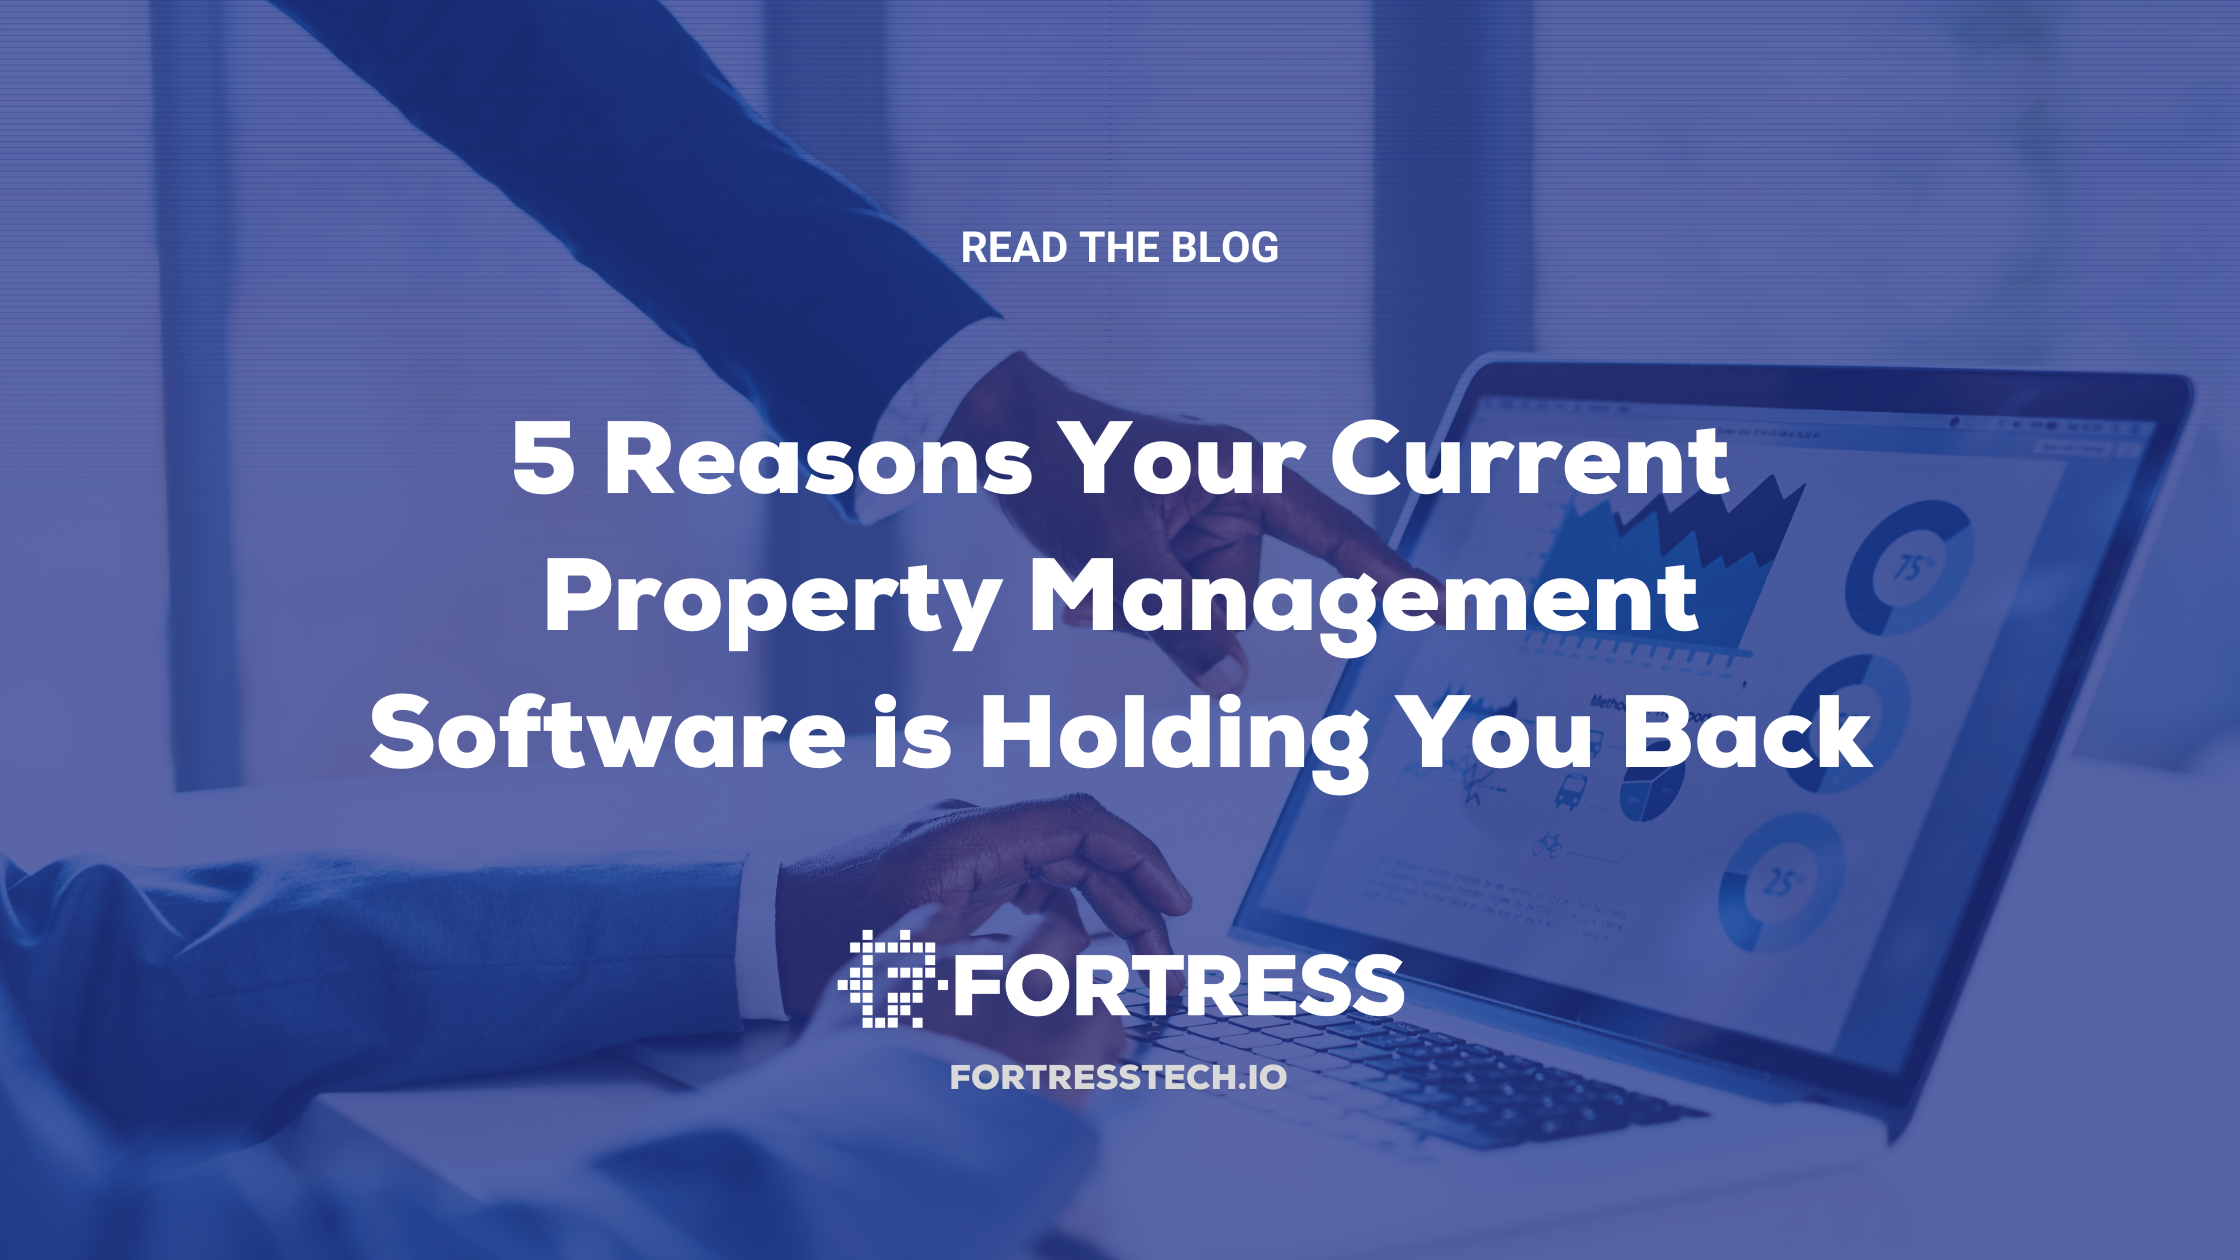 5 Reasons Your Current Property Management Software is Holding You Back